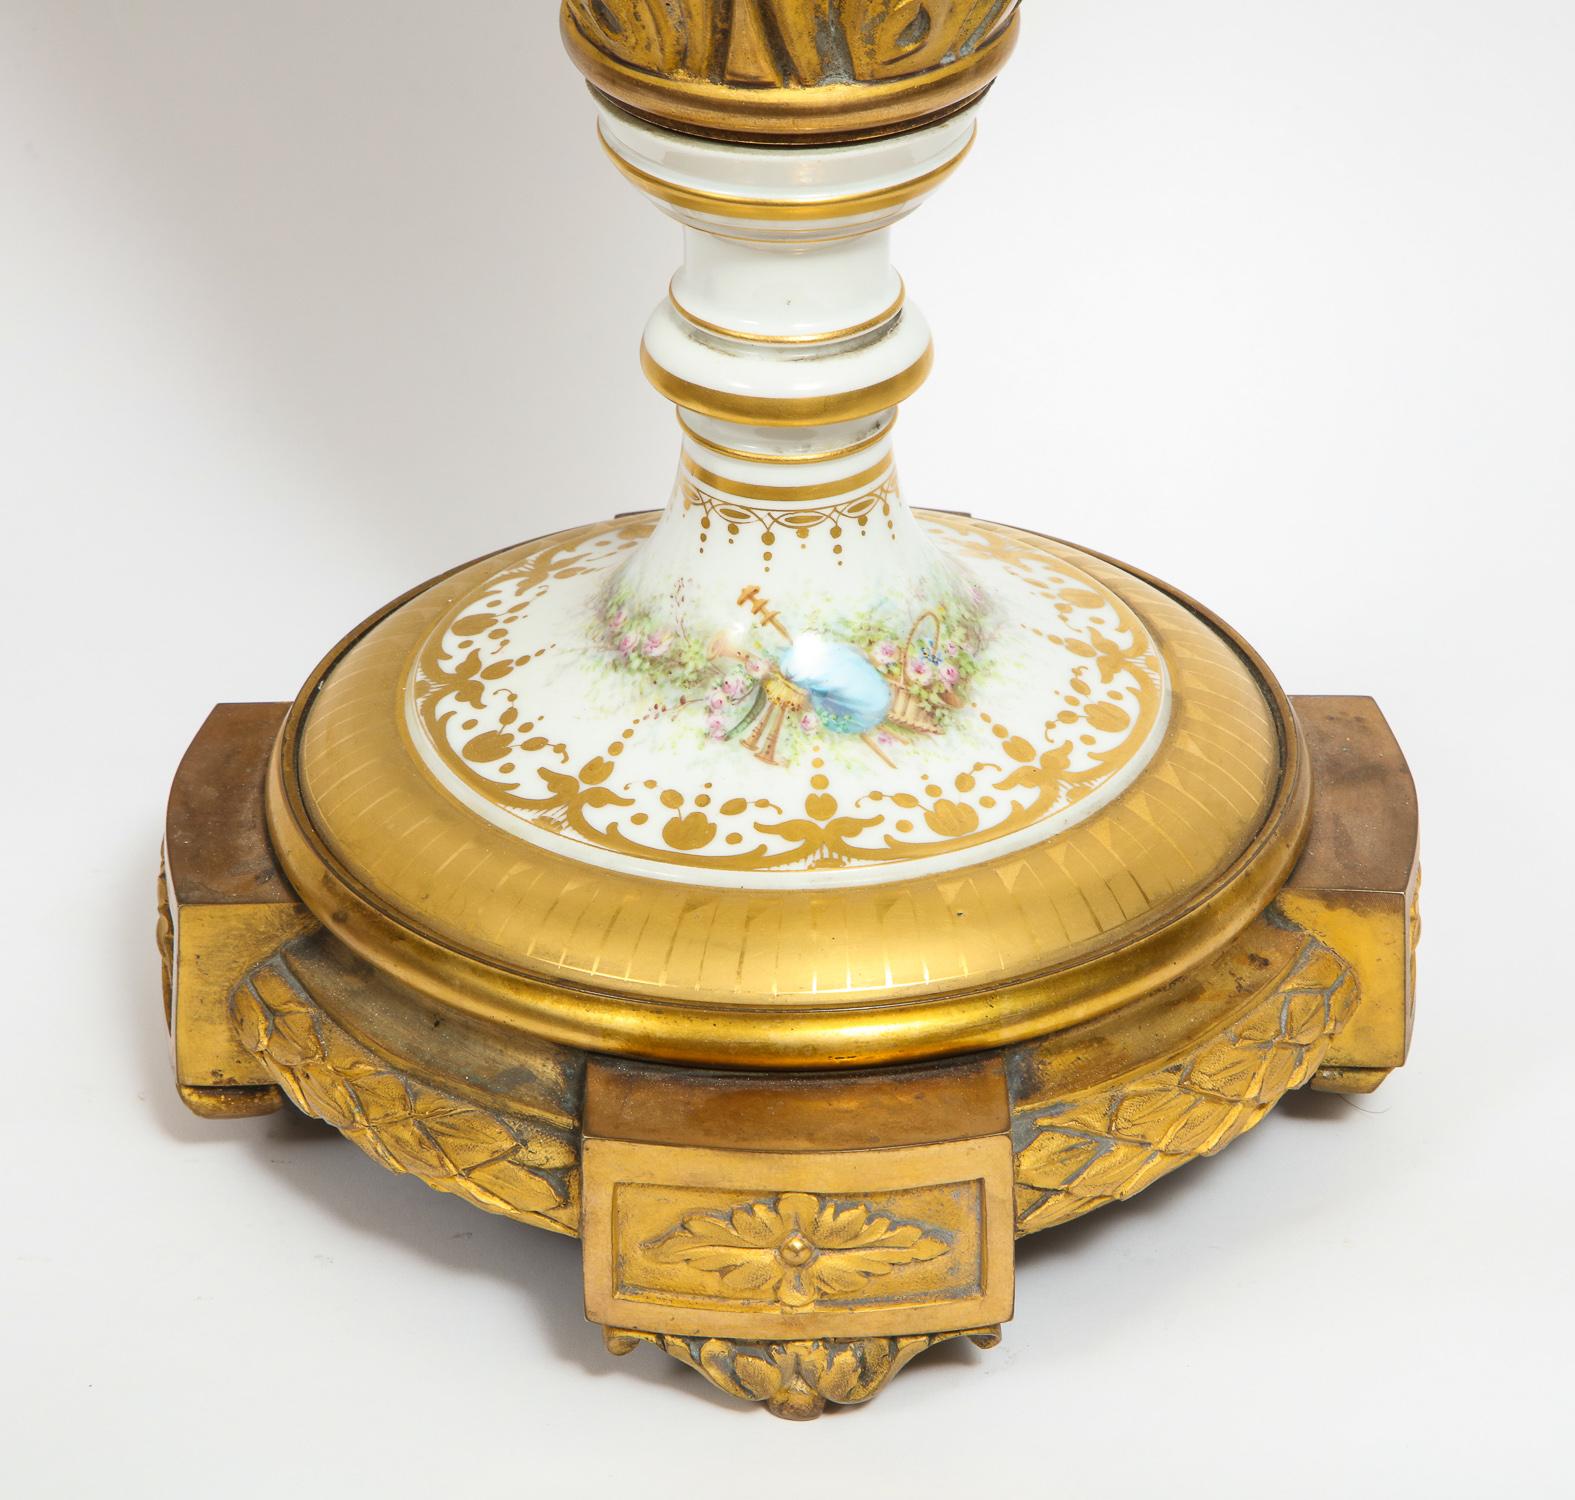 19th Century Monumental Pair of French Ormolu-Mounted White Sèvres Porcelain Vases and Covers